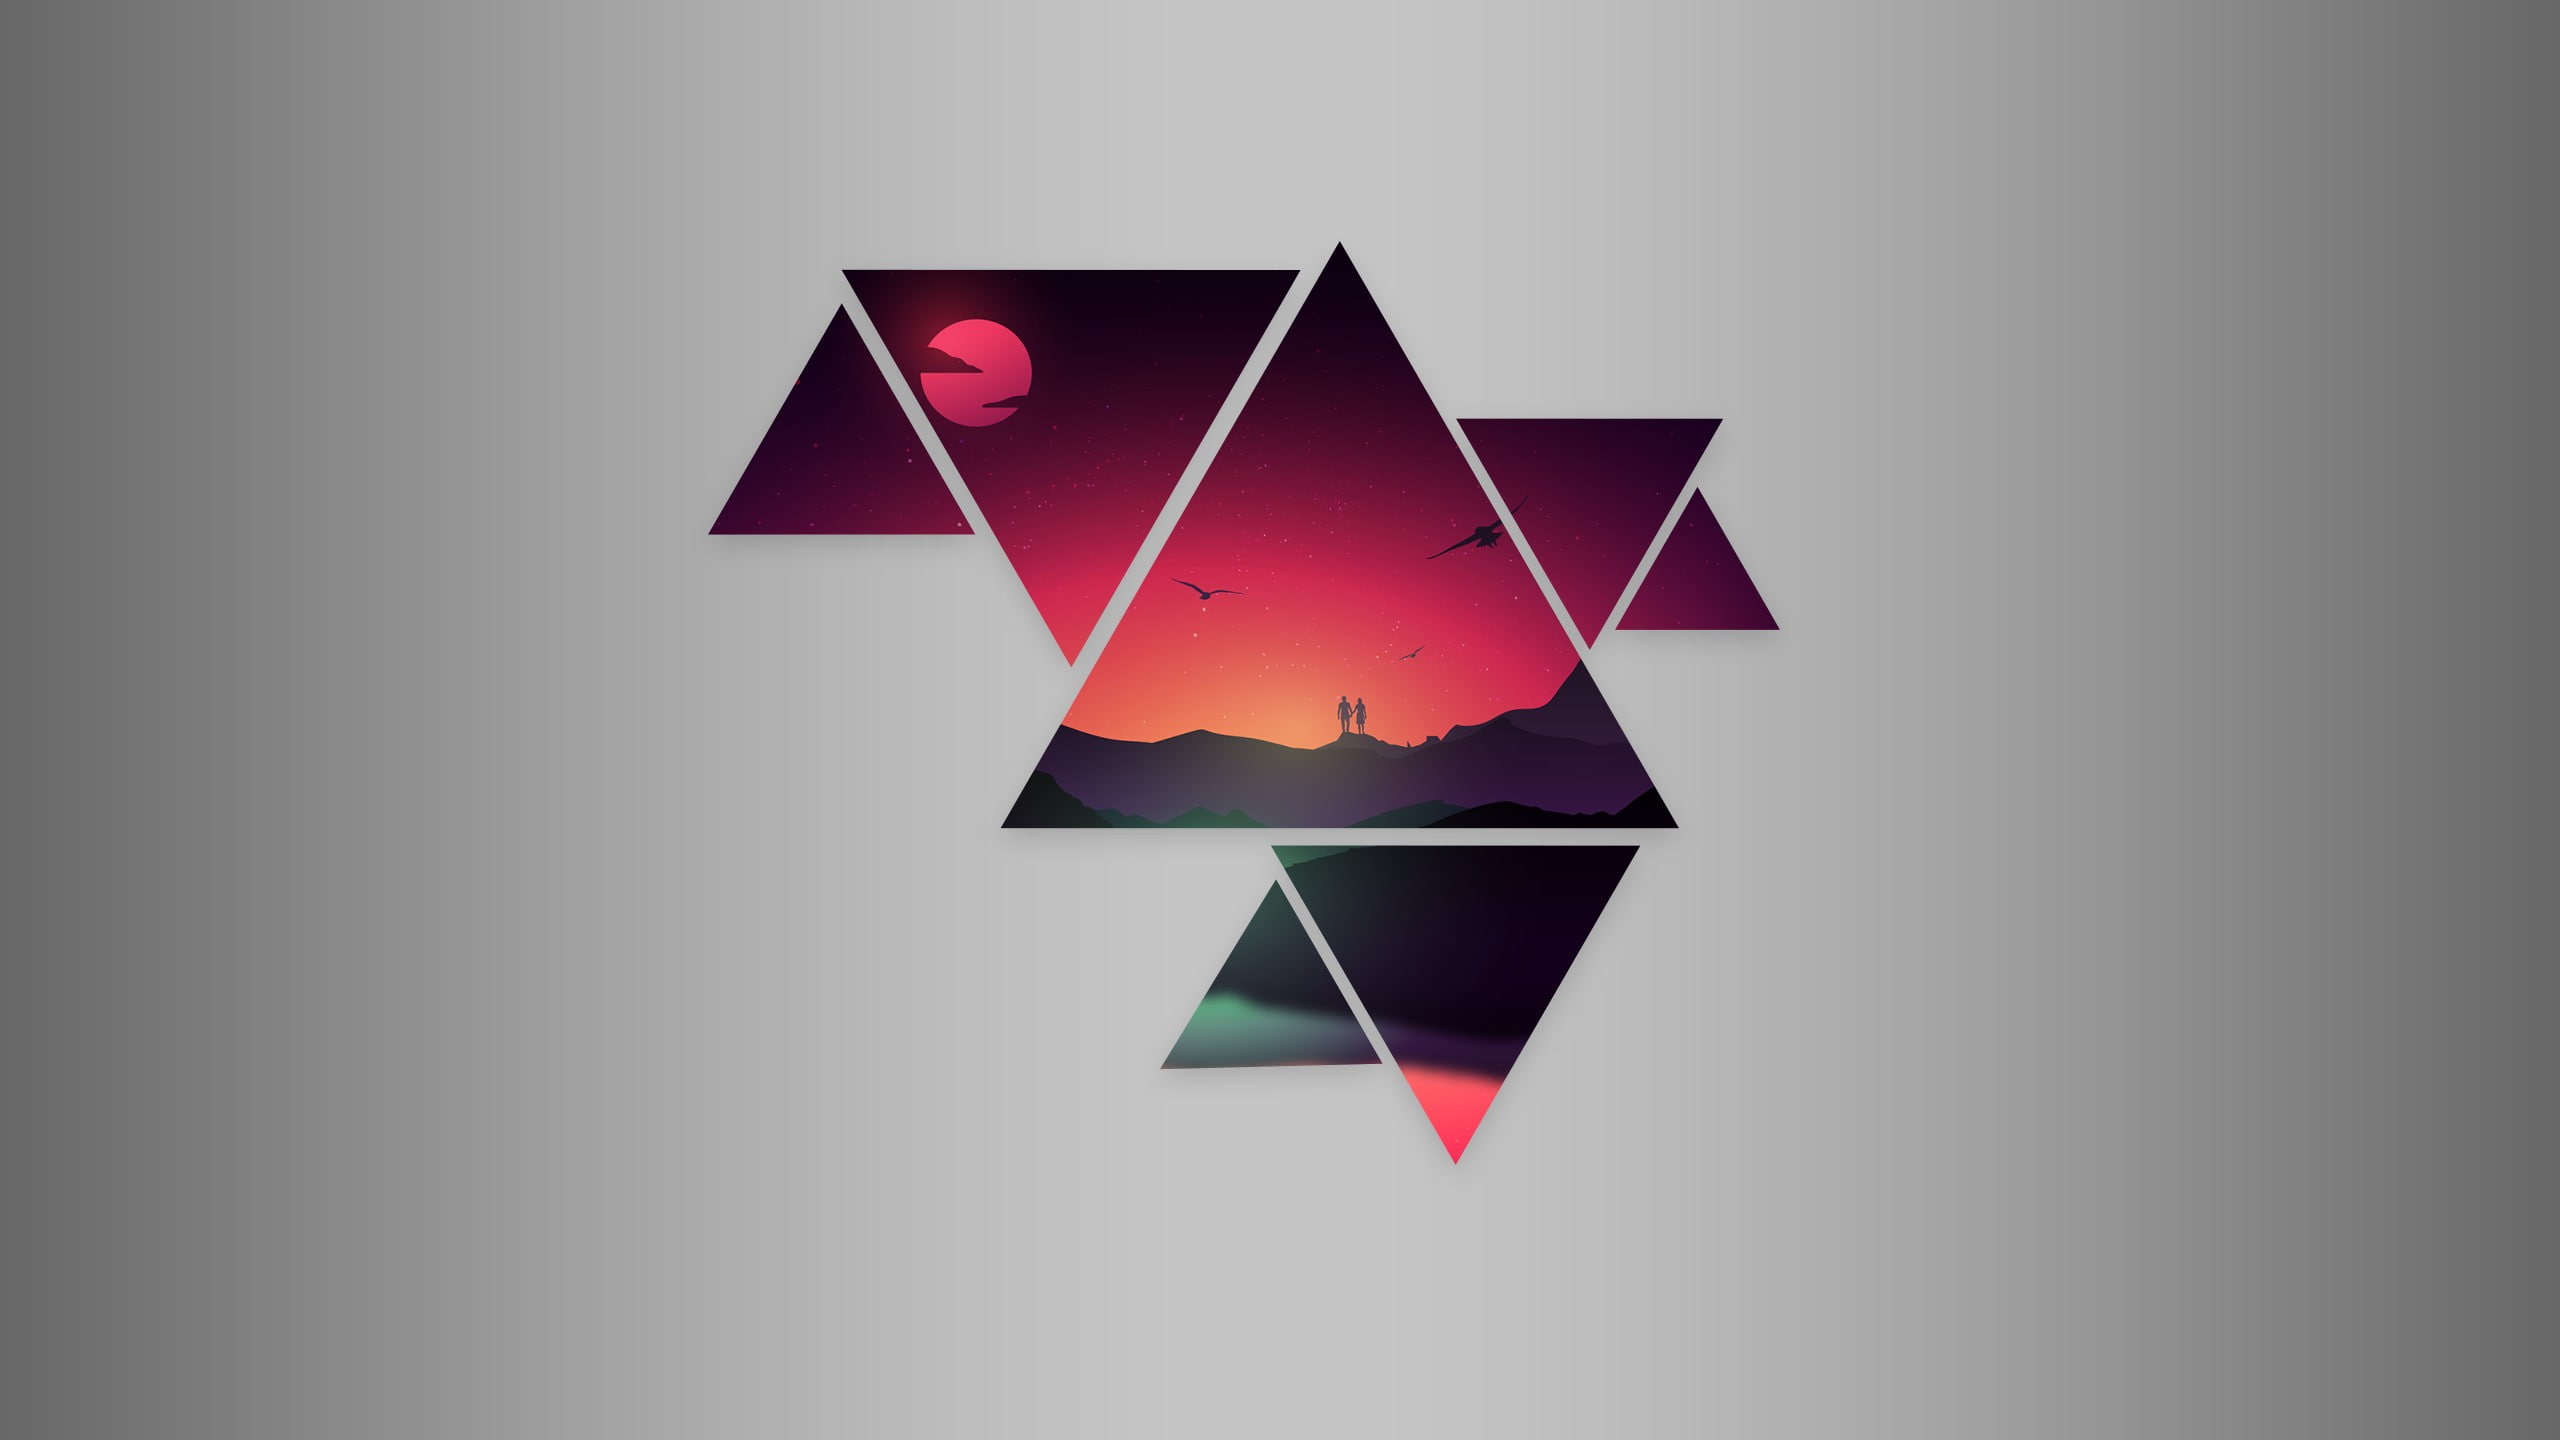 Free download | HD wallpaper: 2560x1440 px abstract sunset Triangle ...